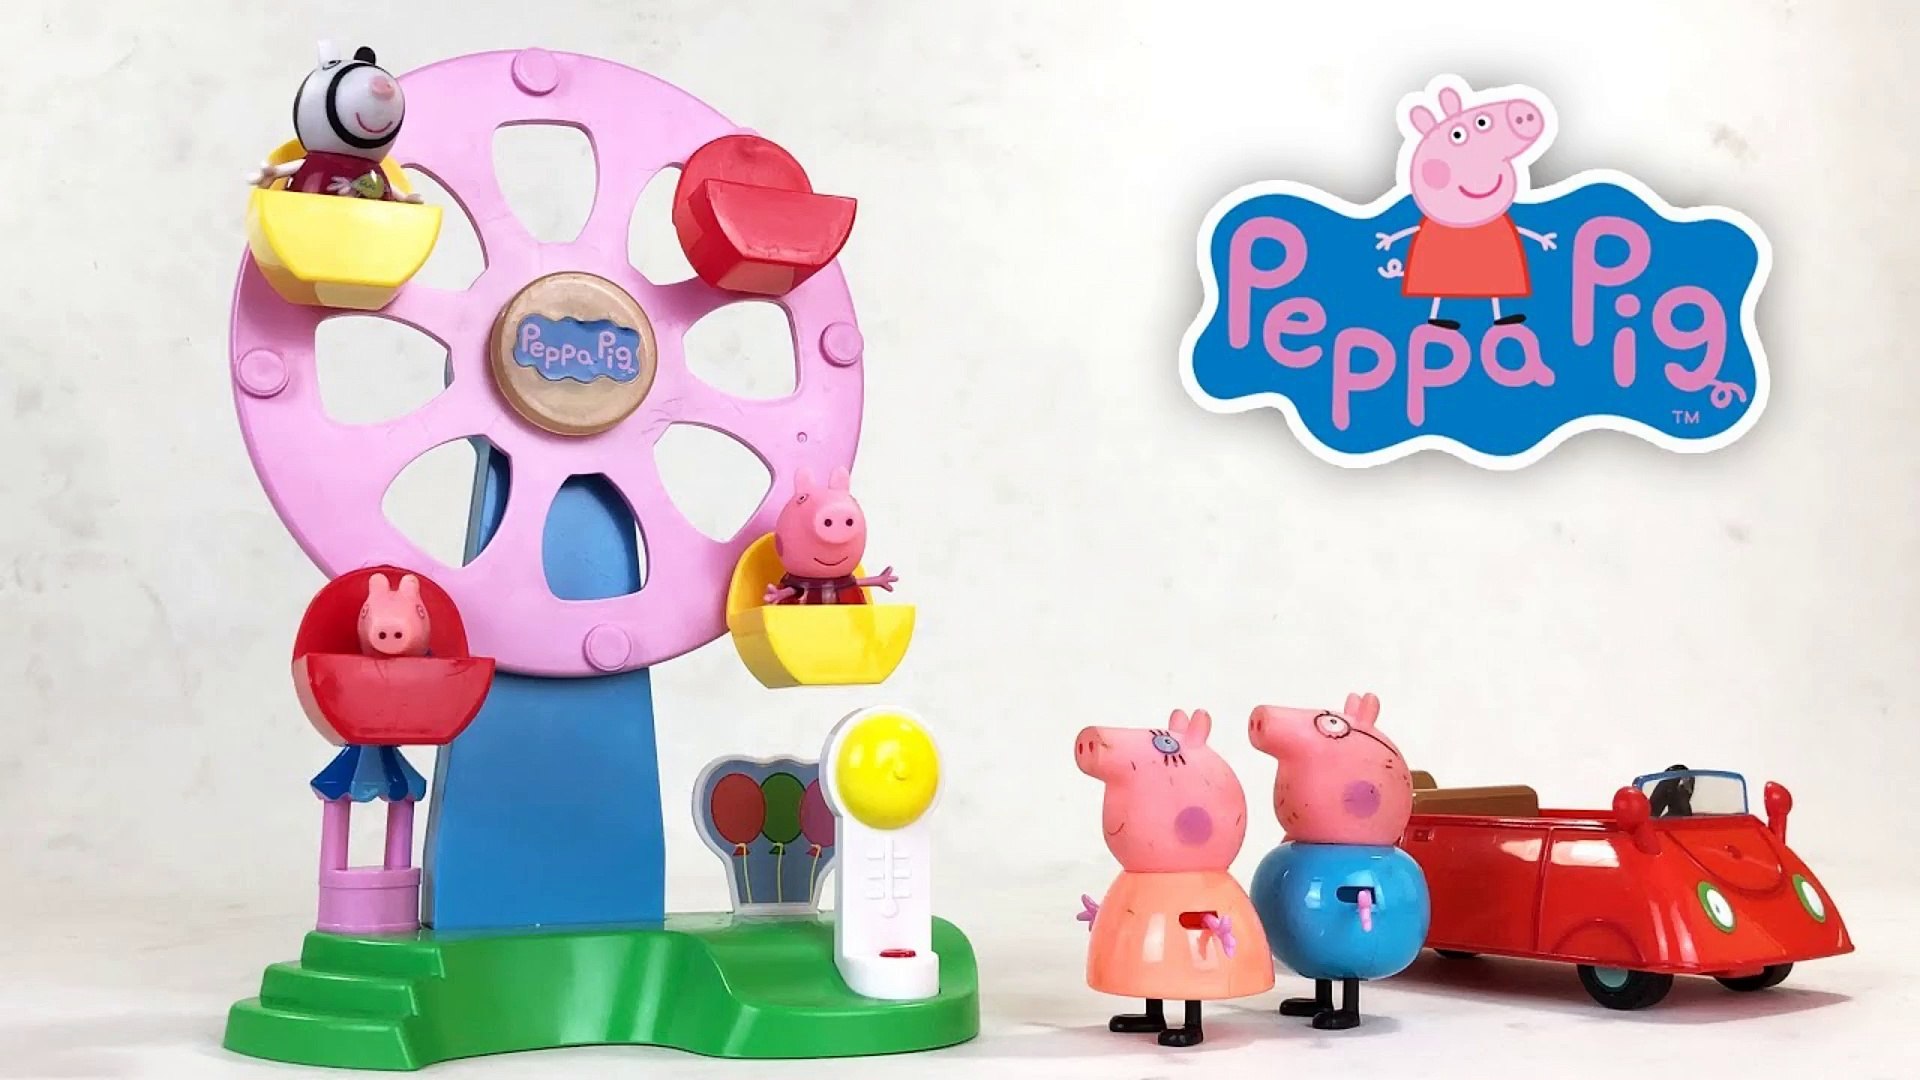 peppa pig toy chest